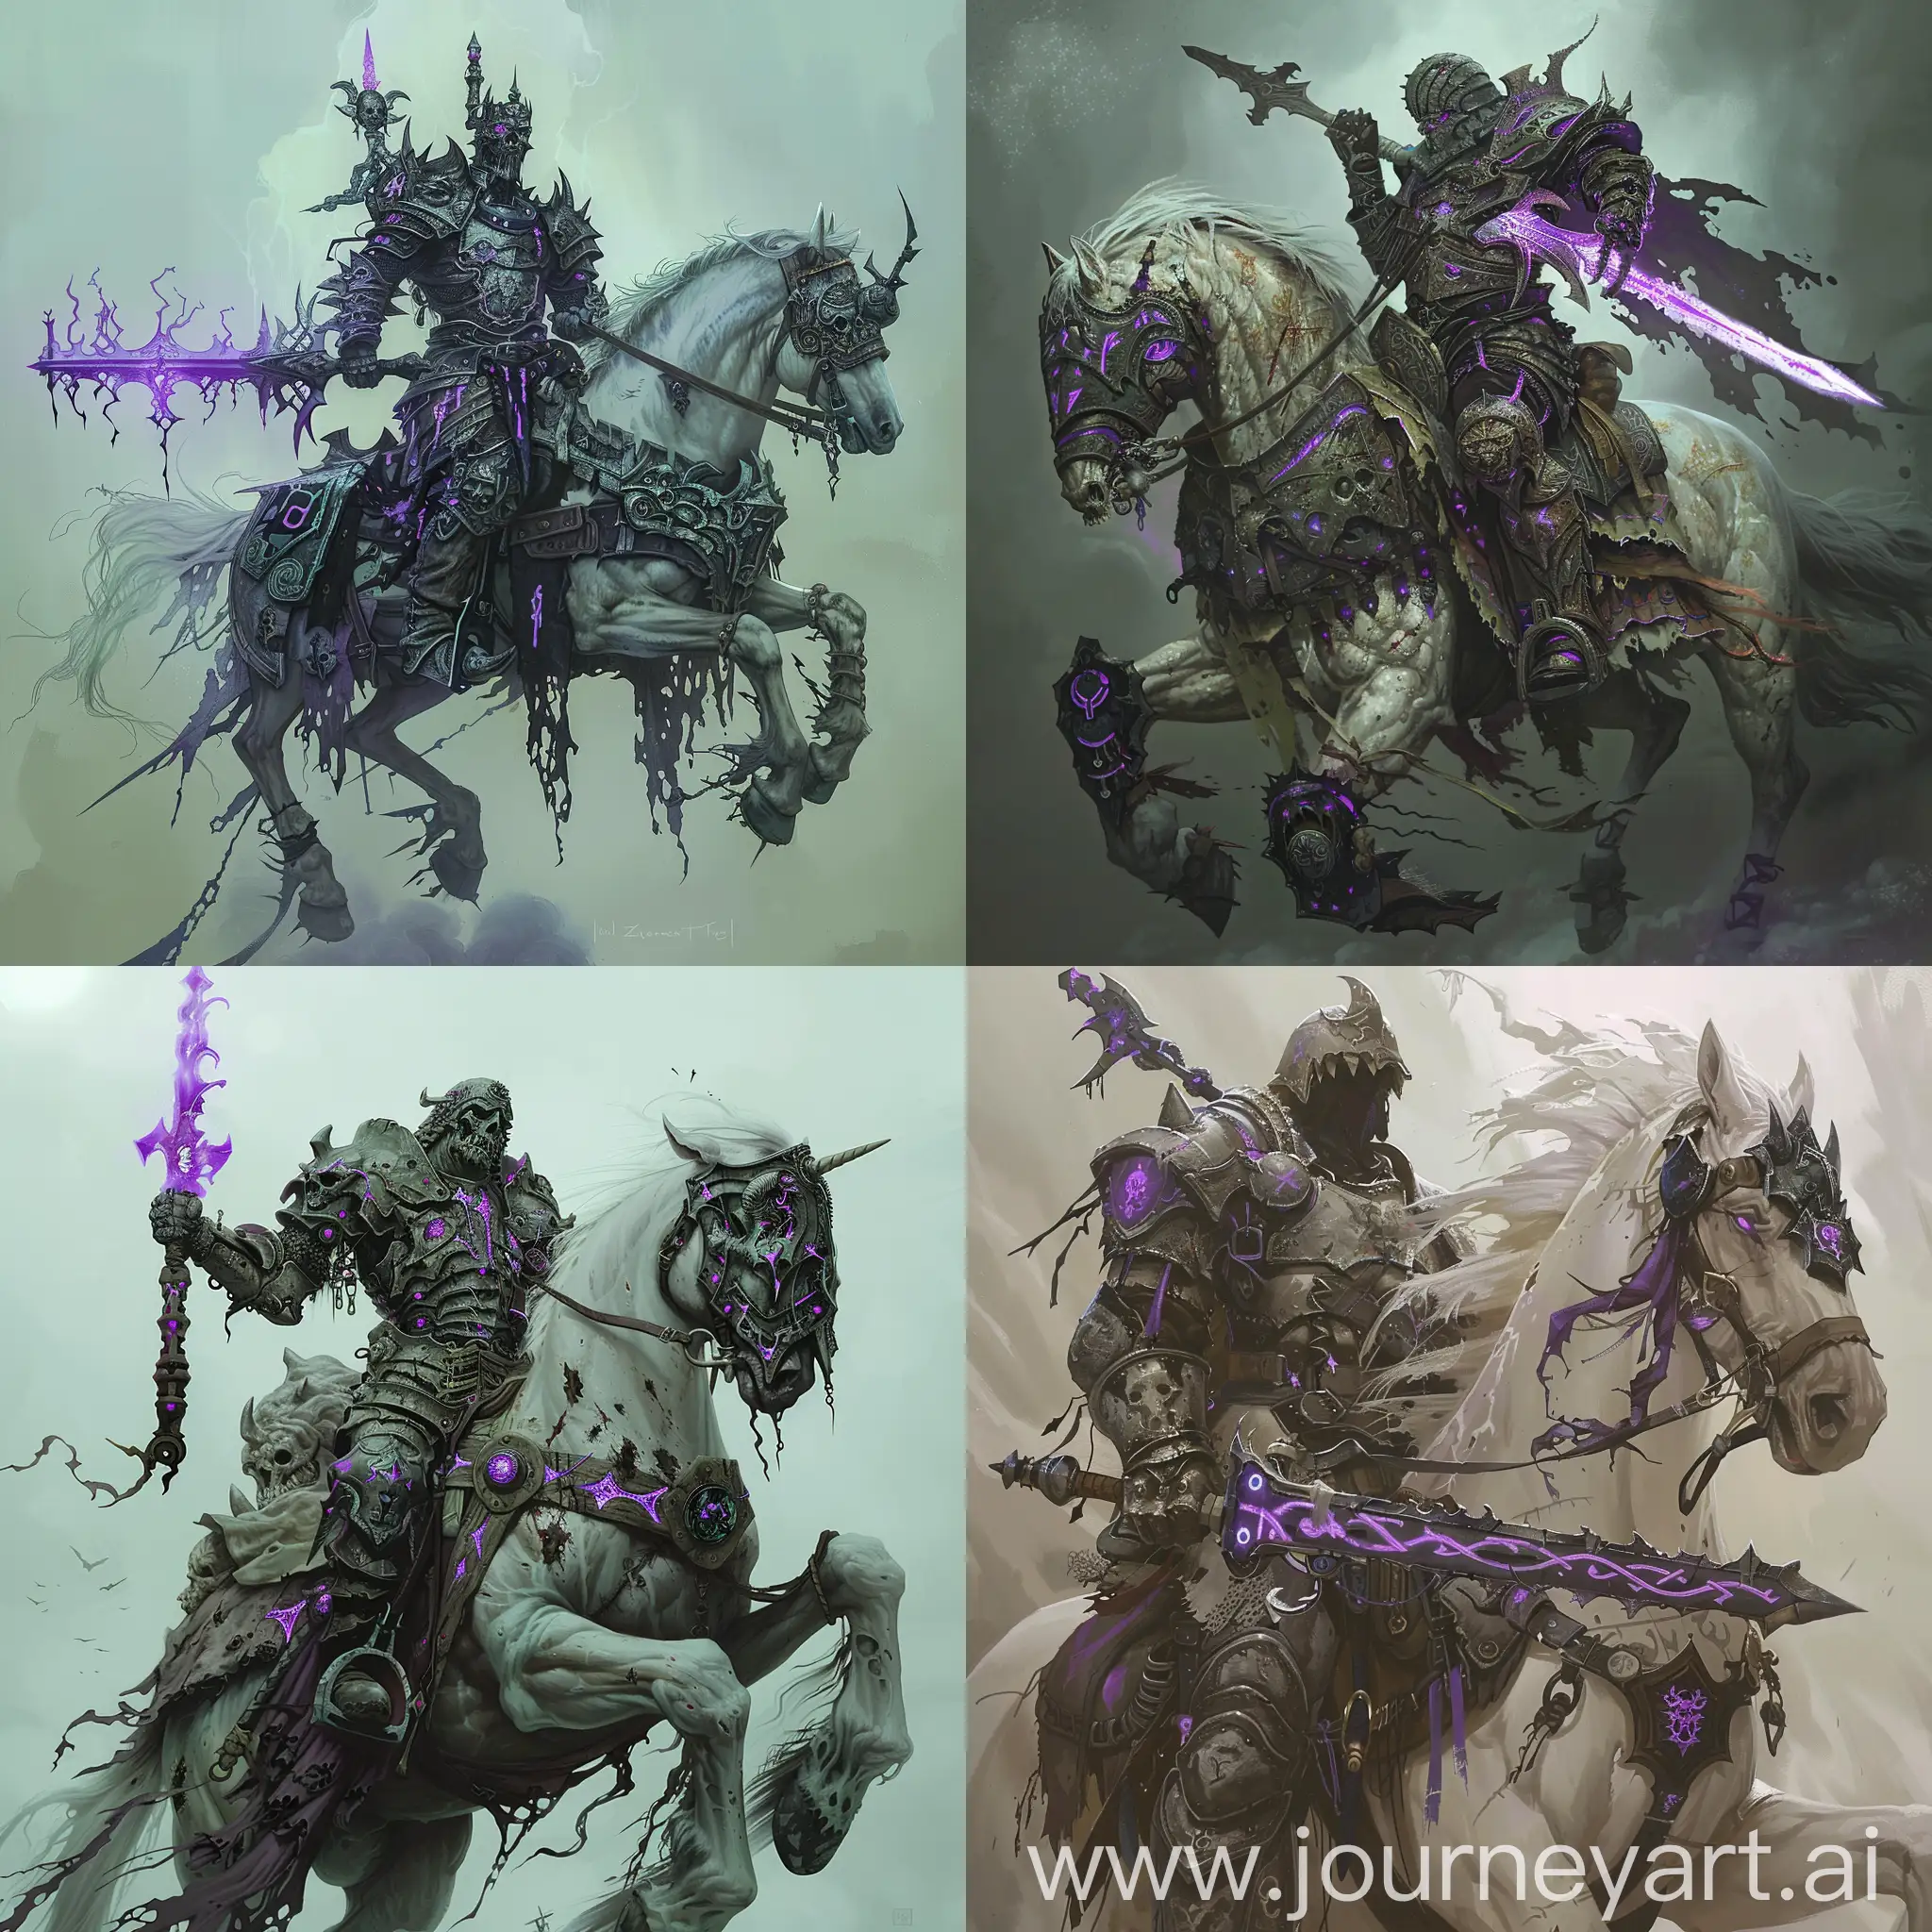 Dark-Fantasy-Warrior-Riding-Ghostly-Pale-Horse-with-Intricate-Greatsword-and-Shield